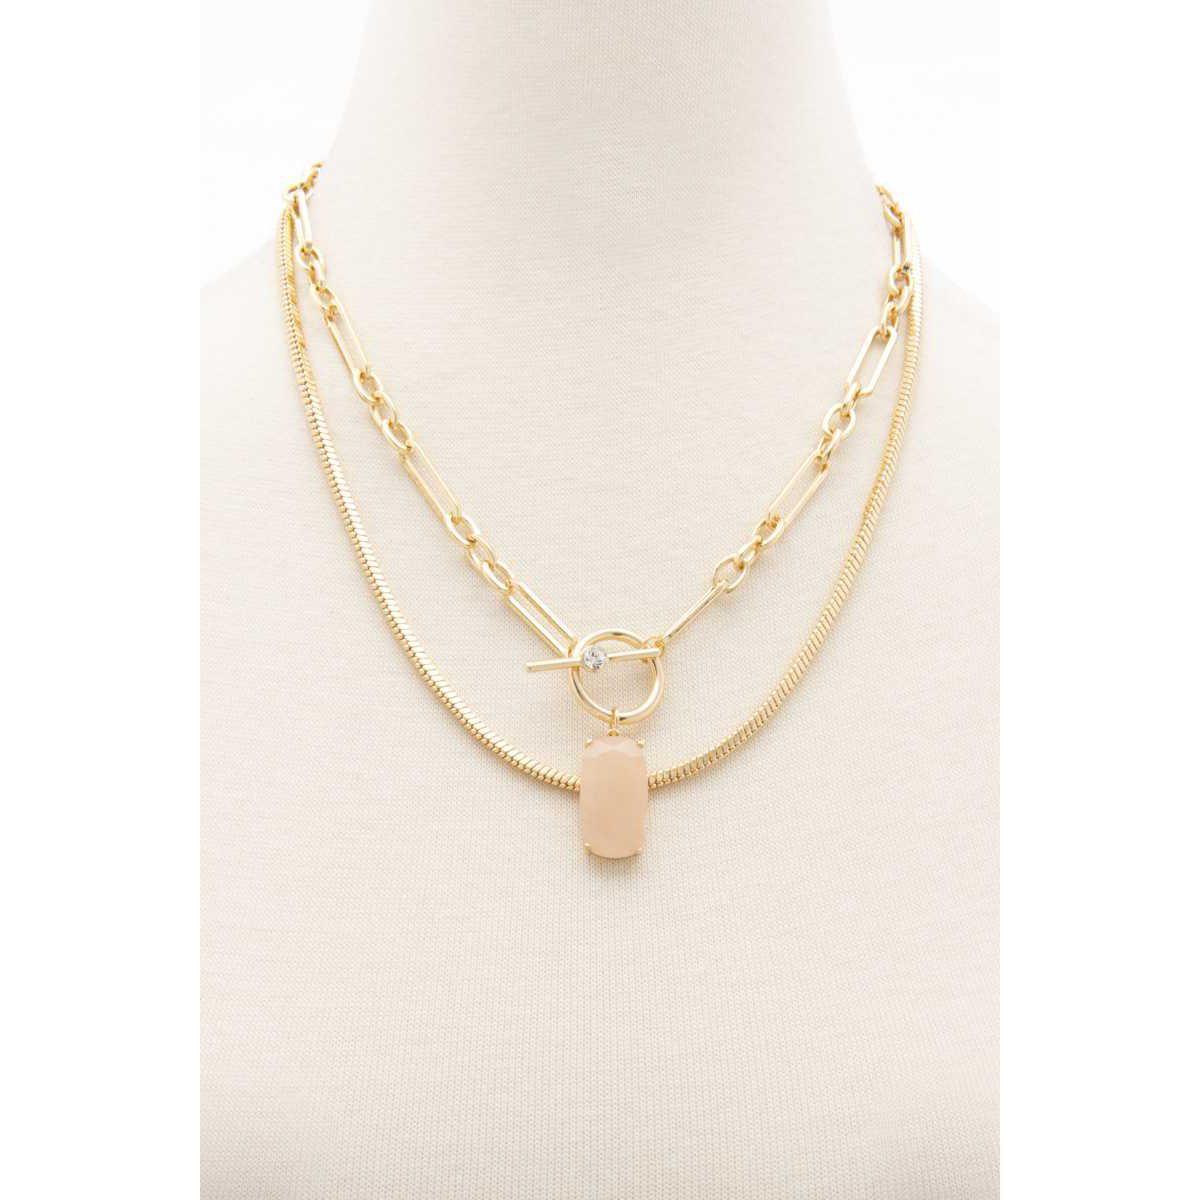 Oval Stone Toggle Clasp Layered Necklace-Necklaces-NXTLVLNYC